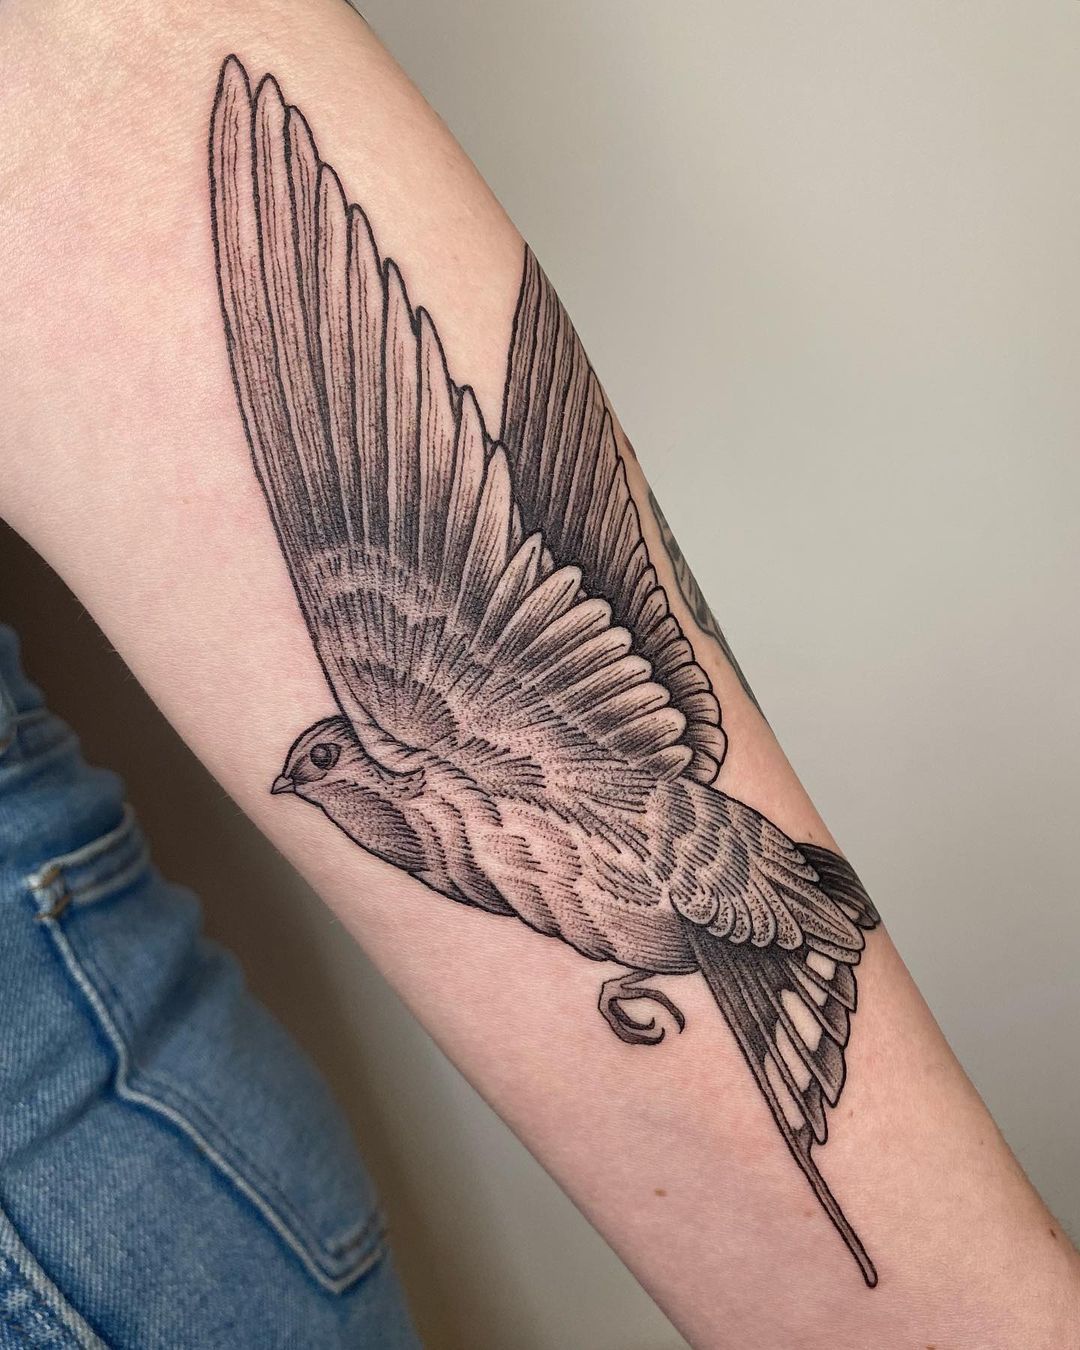 The Best Sparrow Tattoos + Designs with Special Meaning | Sparrow tattoo  design, Sparrow tattoo, Bird tattoos for women